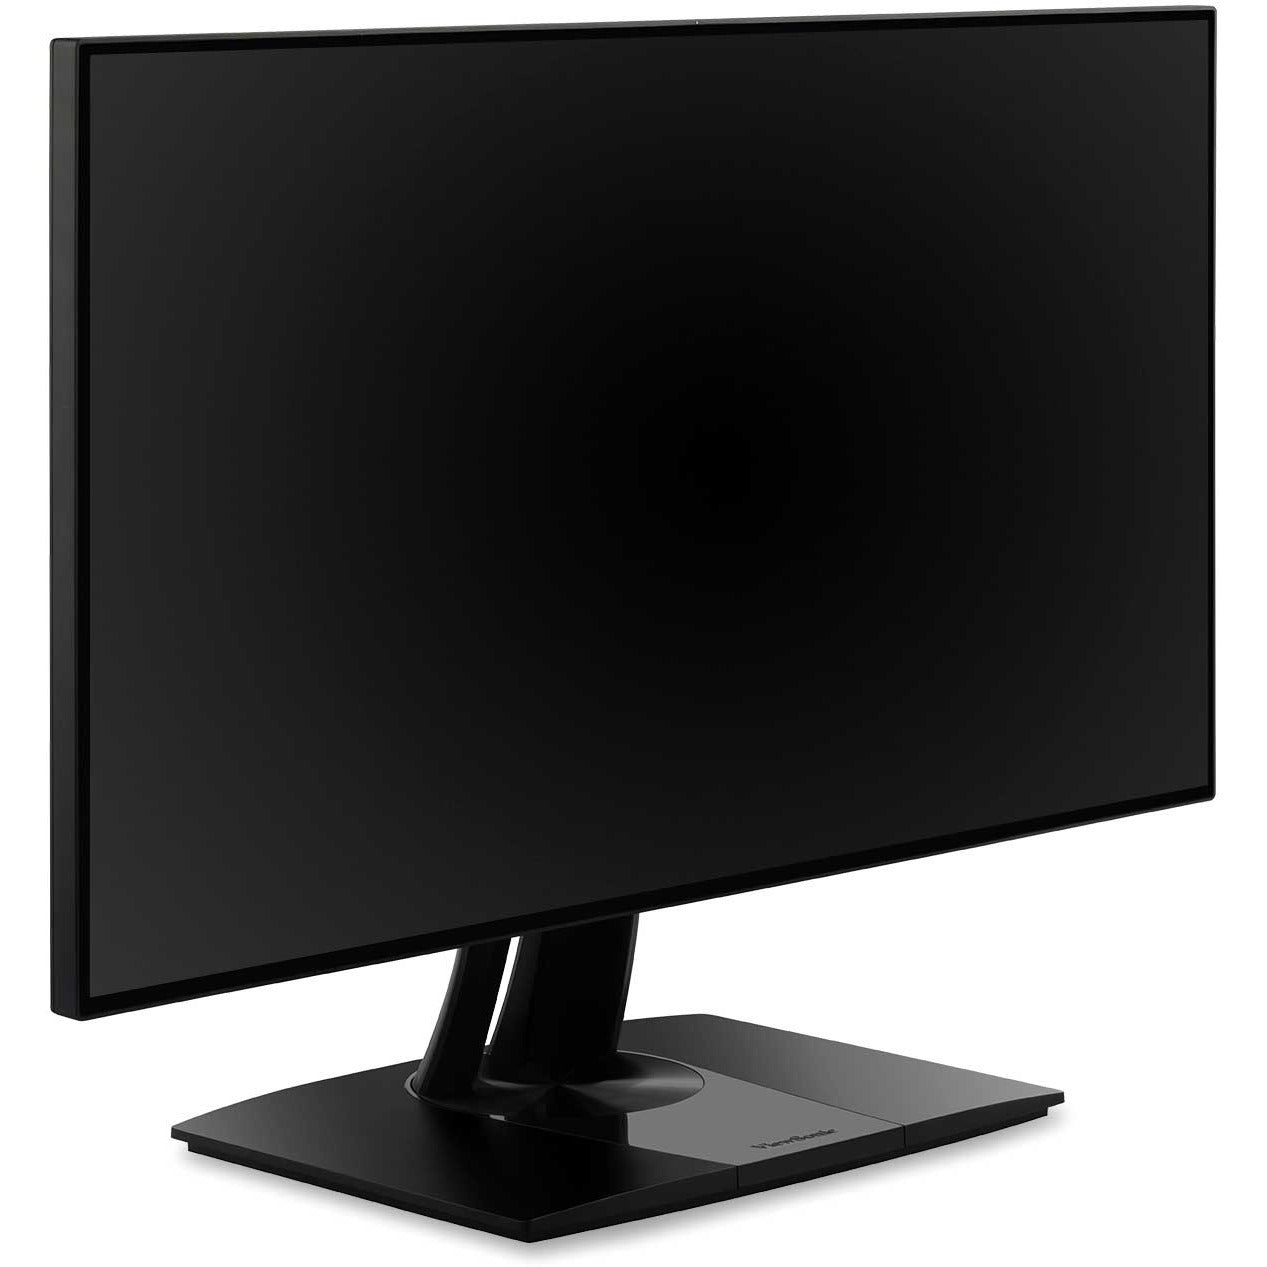 viewsonic-vp2768a-4k-27-inch-premium-ips-4k-monitor-with-advanced-ergonomics-colorpro-100%-srgb-rec-709-14-bit-3d-lut-eye-care-hdmi-usb-c-displayport-for-professional-home-and-office-colorpro-vp2768a-4k-4k-uhd-monitor-with-ergonomics-usb-c_vewvp2768a4k - 5